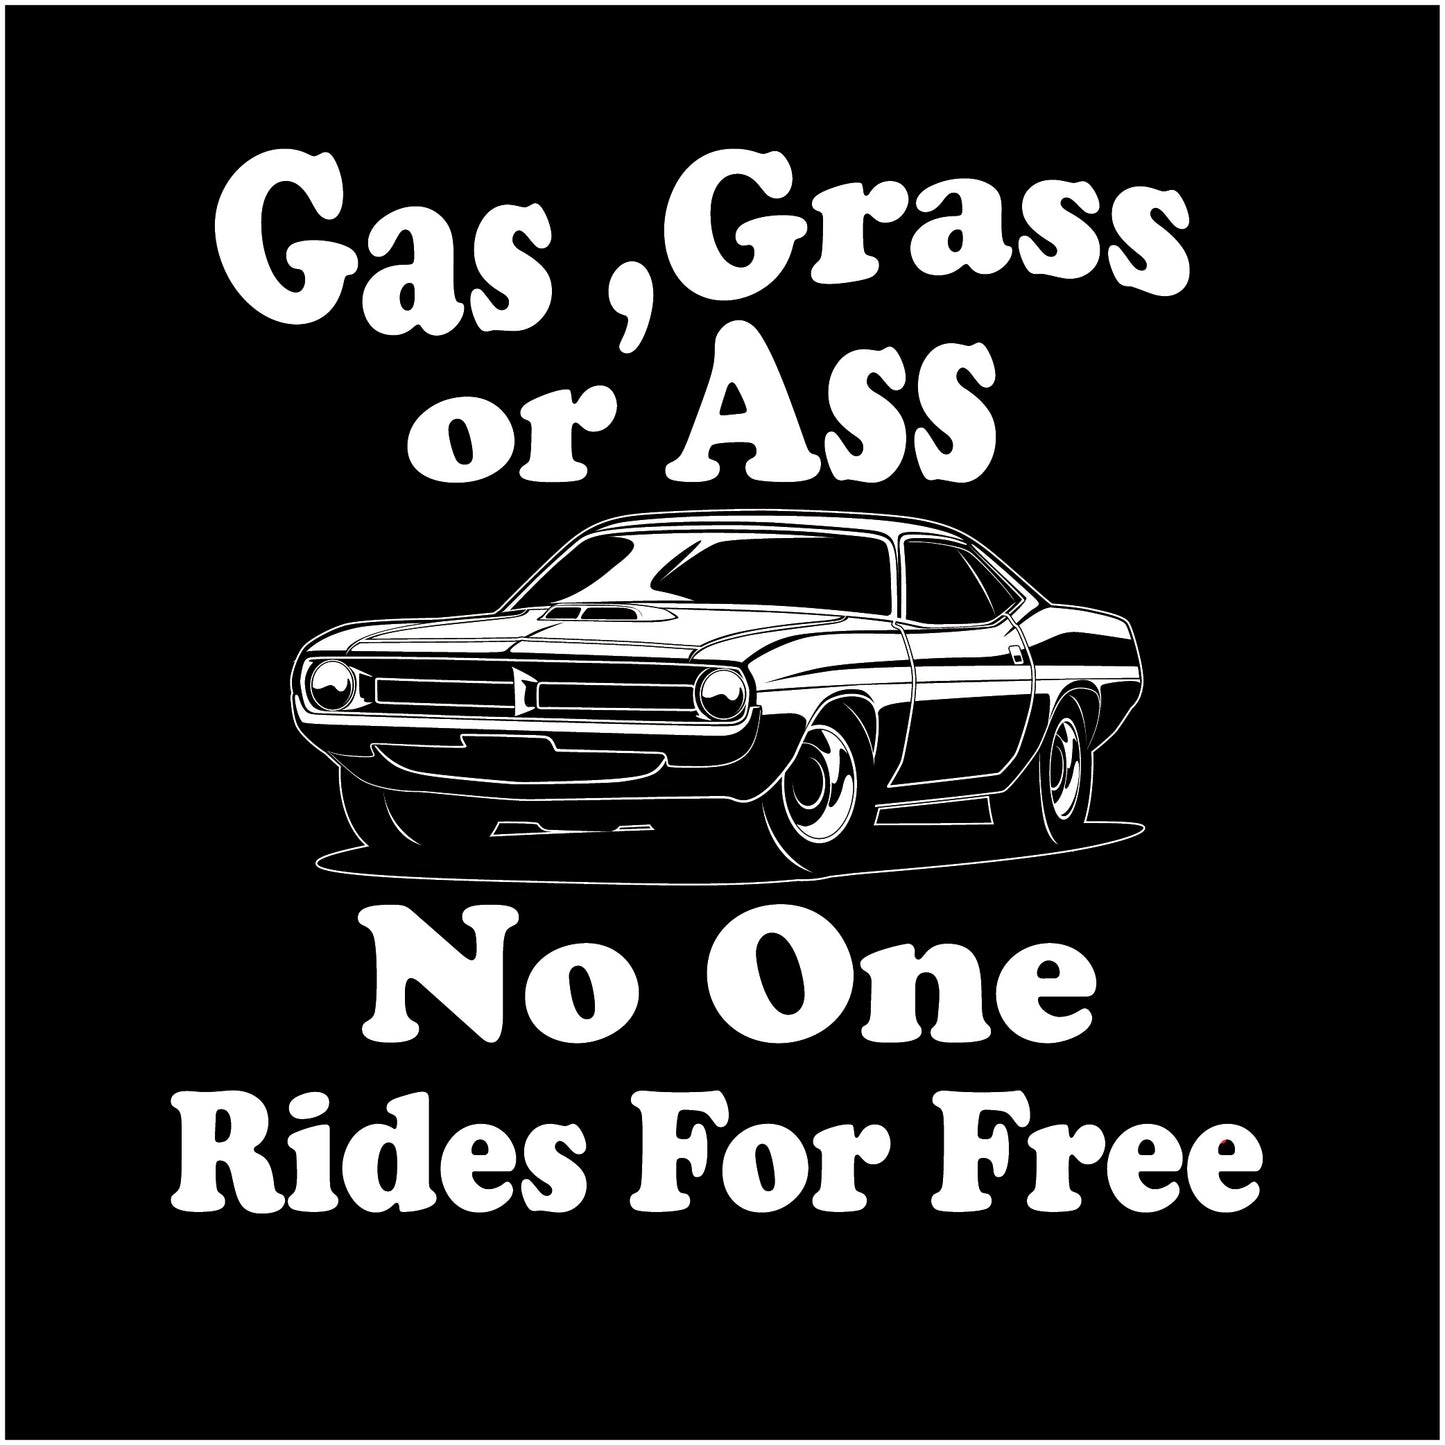 Gas, Grass or Ass No One Rides For Free, New